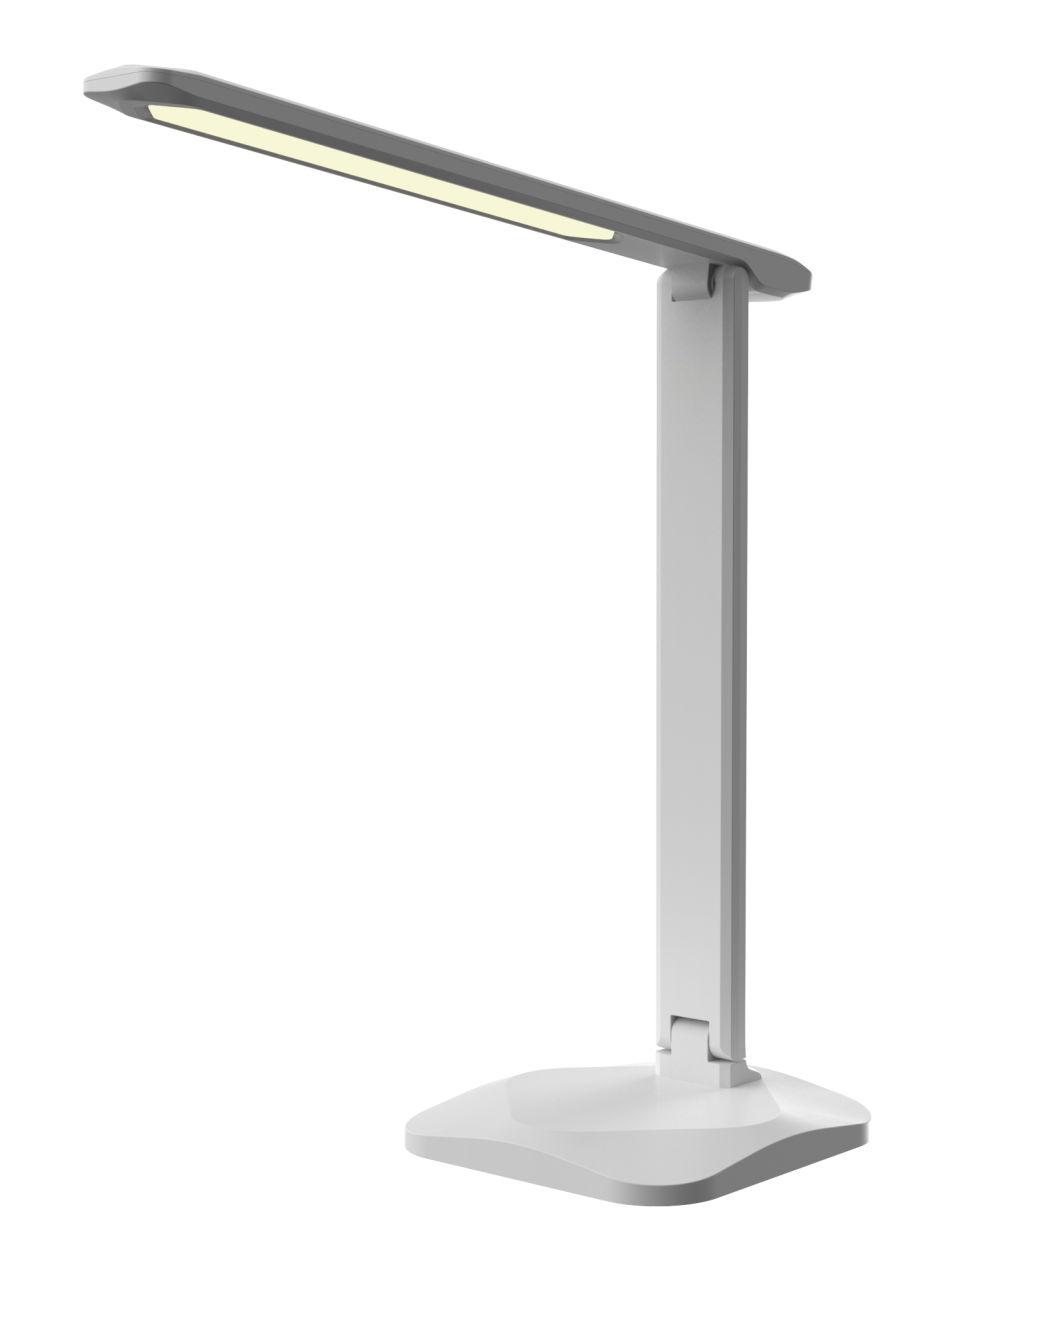 Table Lamp for LED Desk Lamp with USB Charging Port